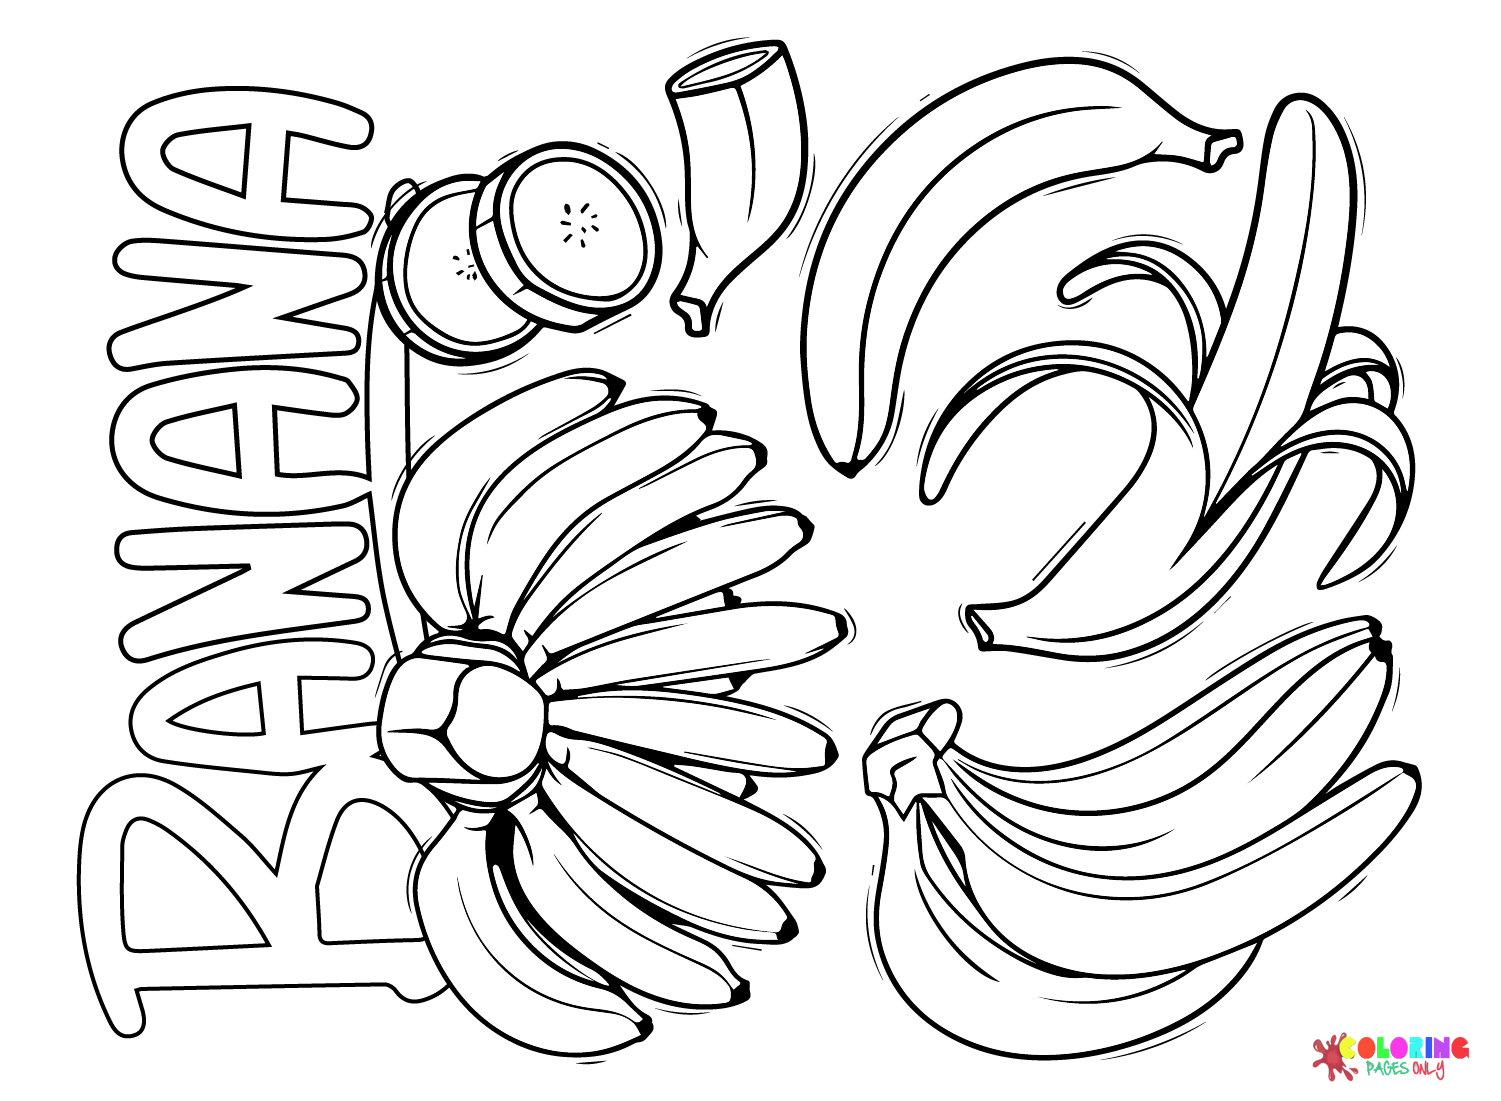 Banana Doodle Coloring Pages